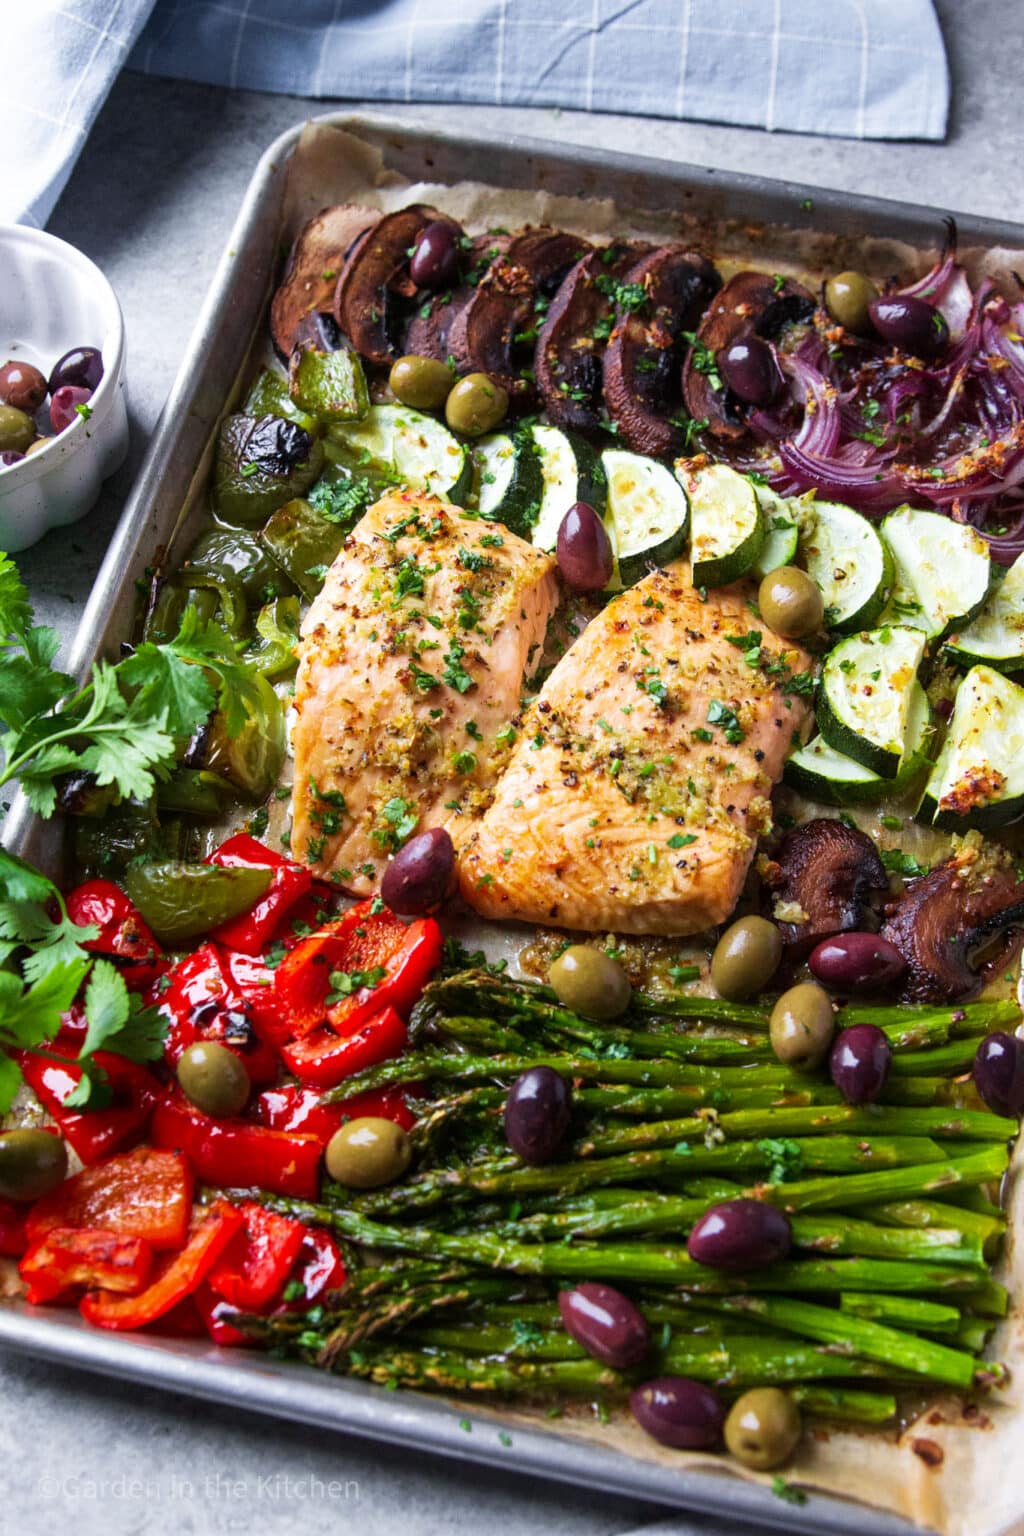 A variety of sheet pan recipes featuring chicken and vegetables, salmon, and healthy one pan meals with vibrant colors and fresh ingredients.